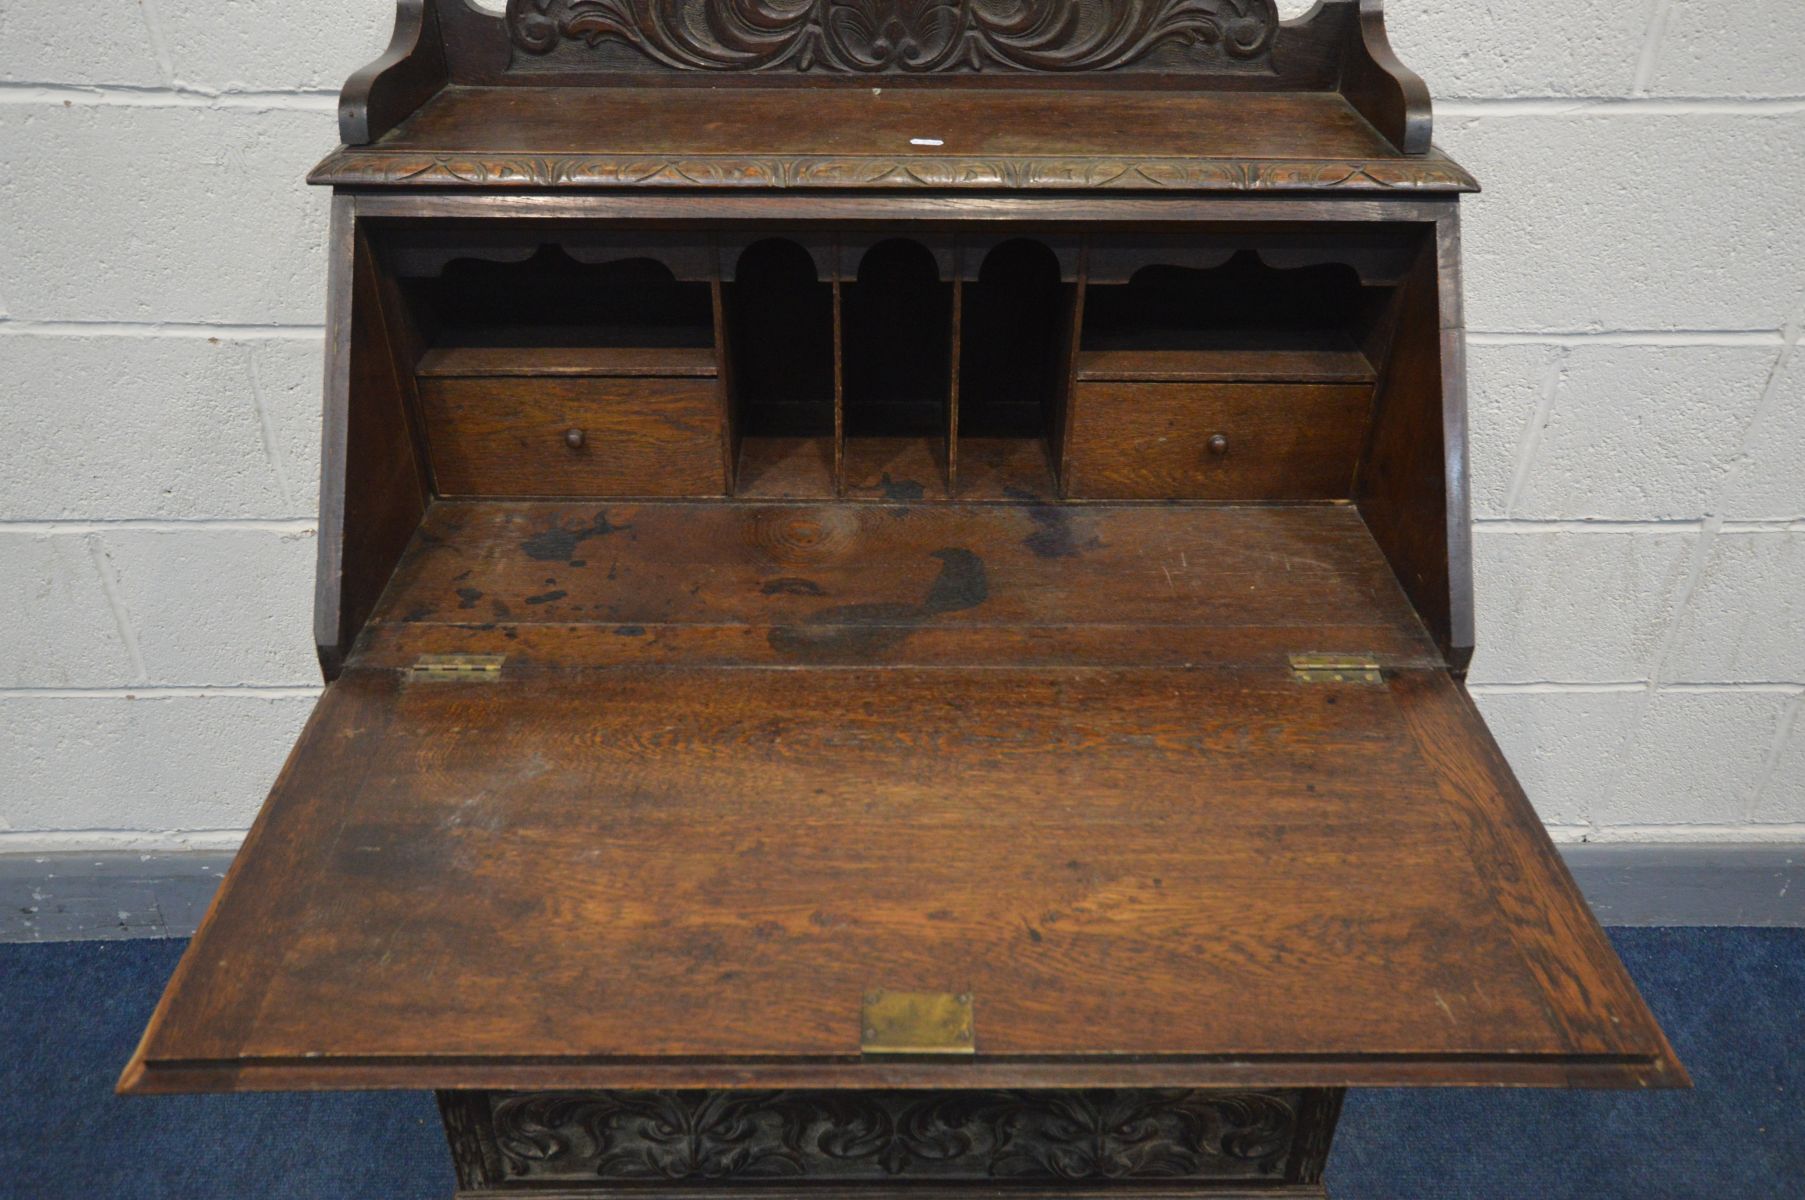 AN EARLY 20TH CENTURY CARVED OAK BUREAU, gallery top, the fall front with a fitted interior, above - Image 3 of 4